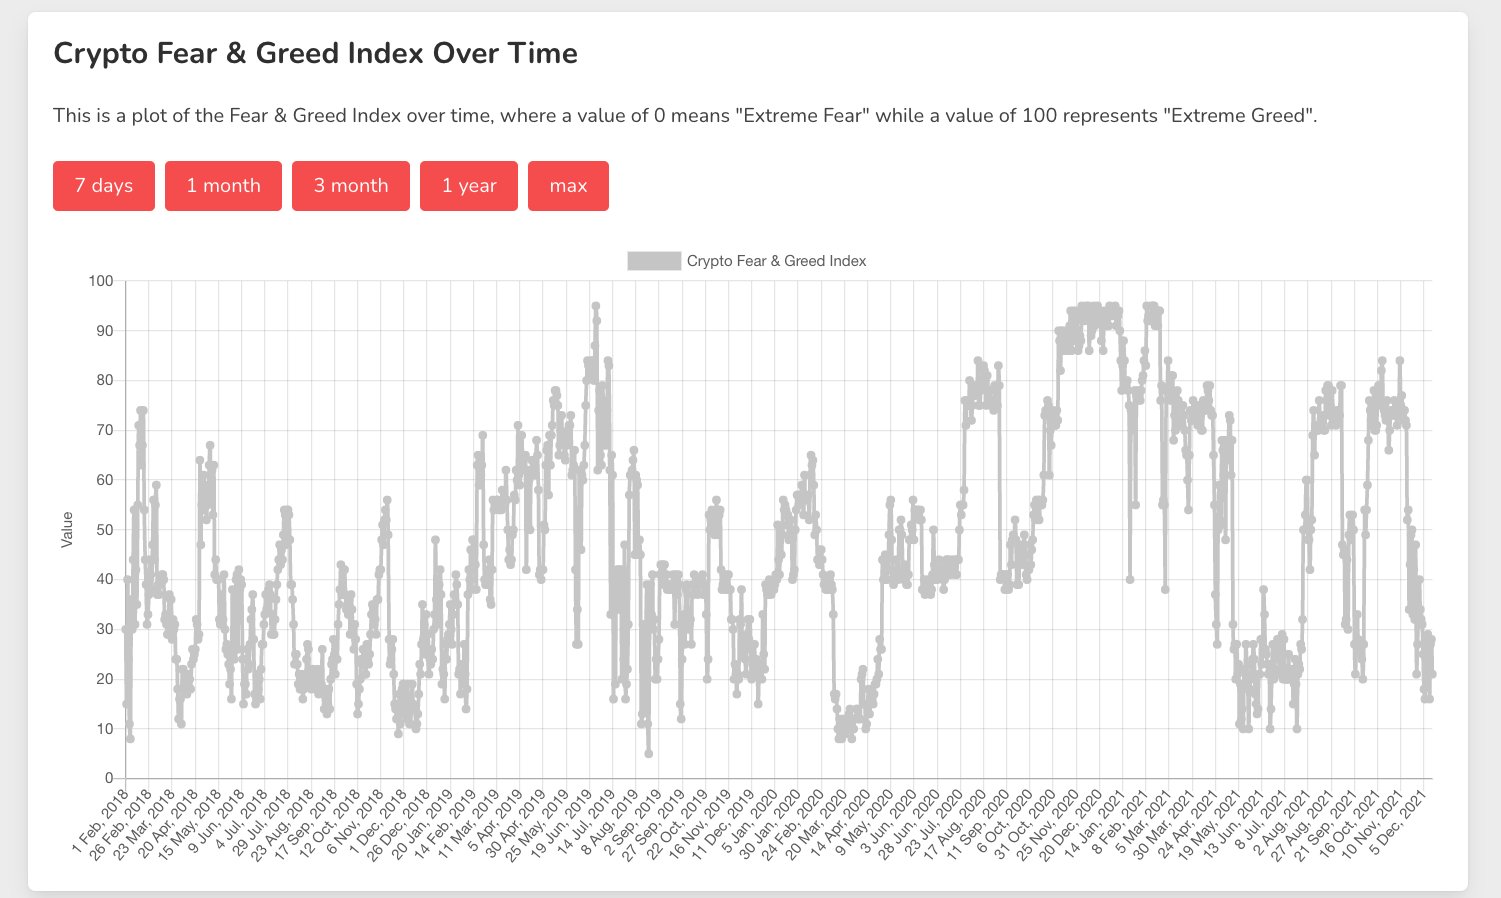 Crypto Fear and Greed Index over time